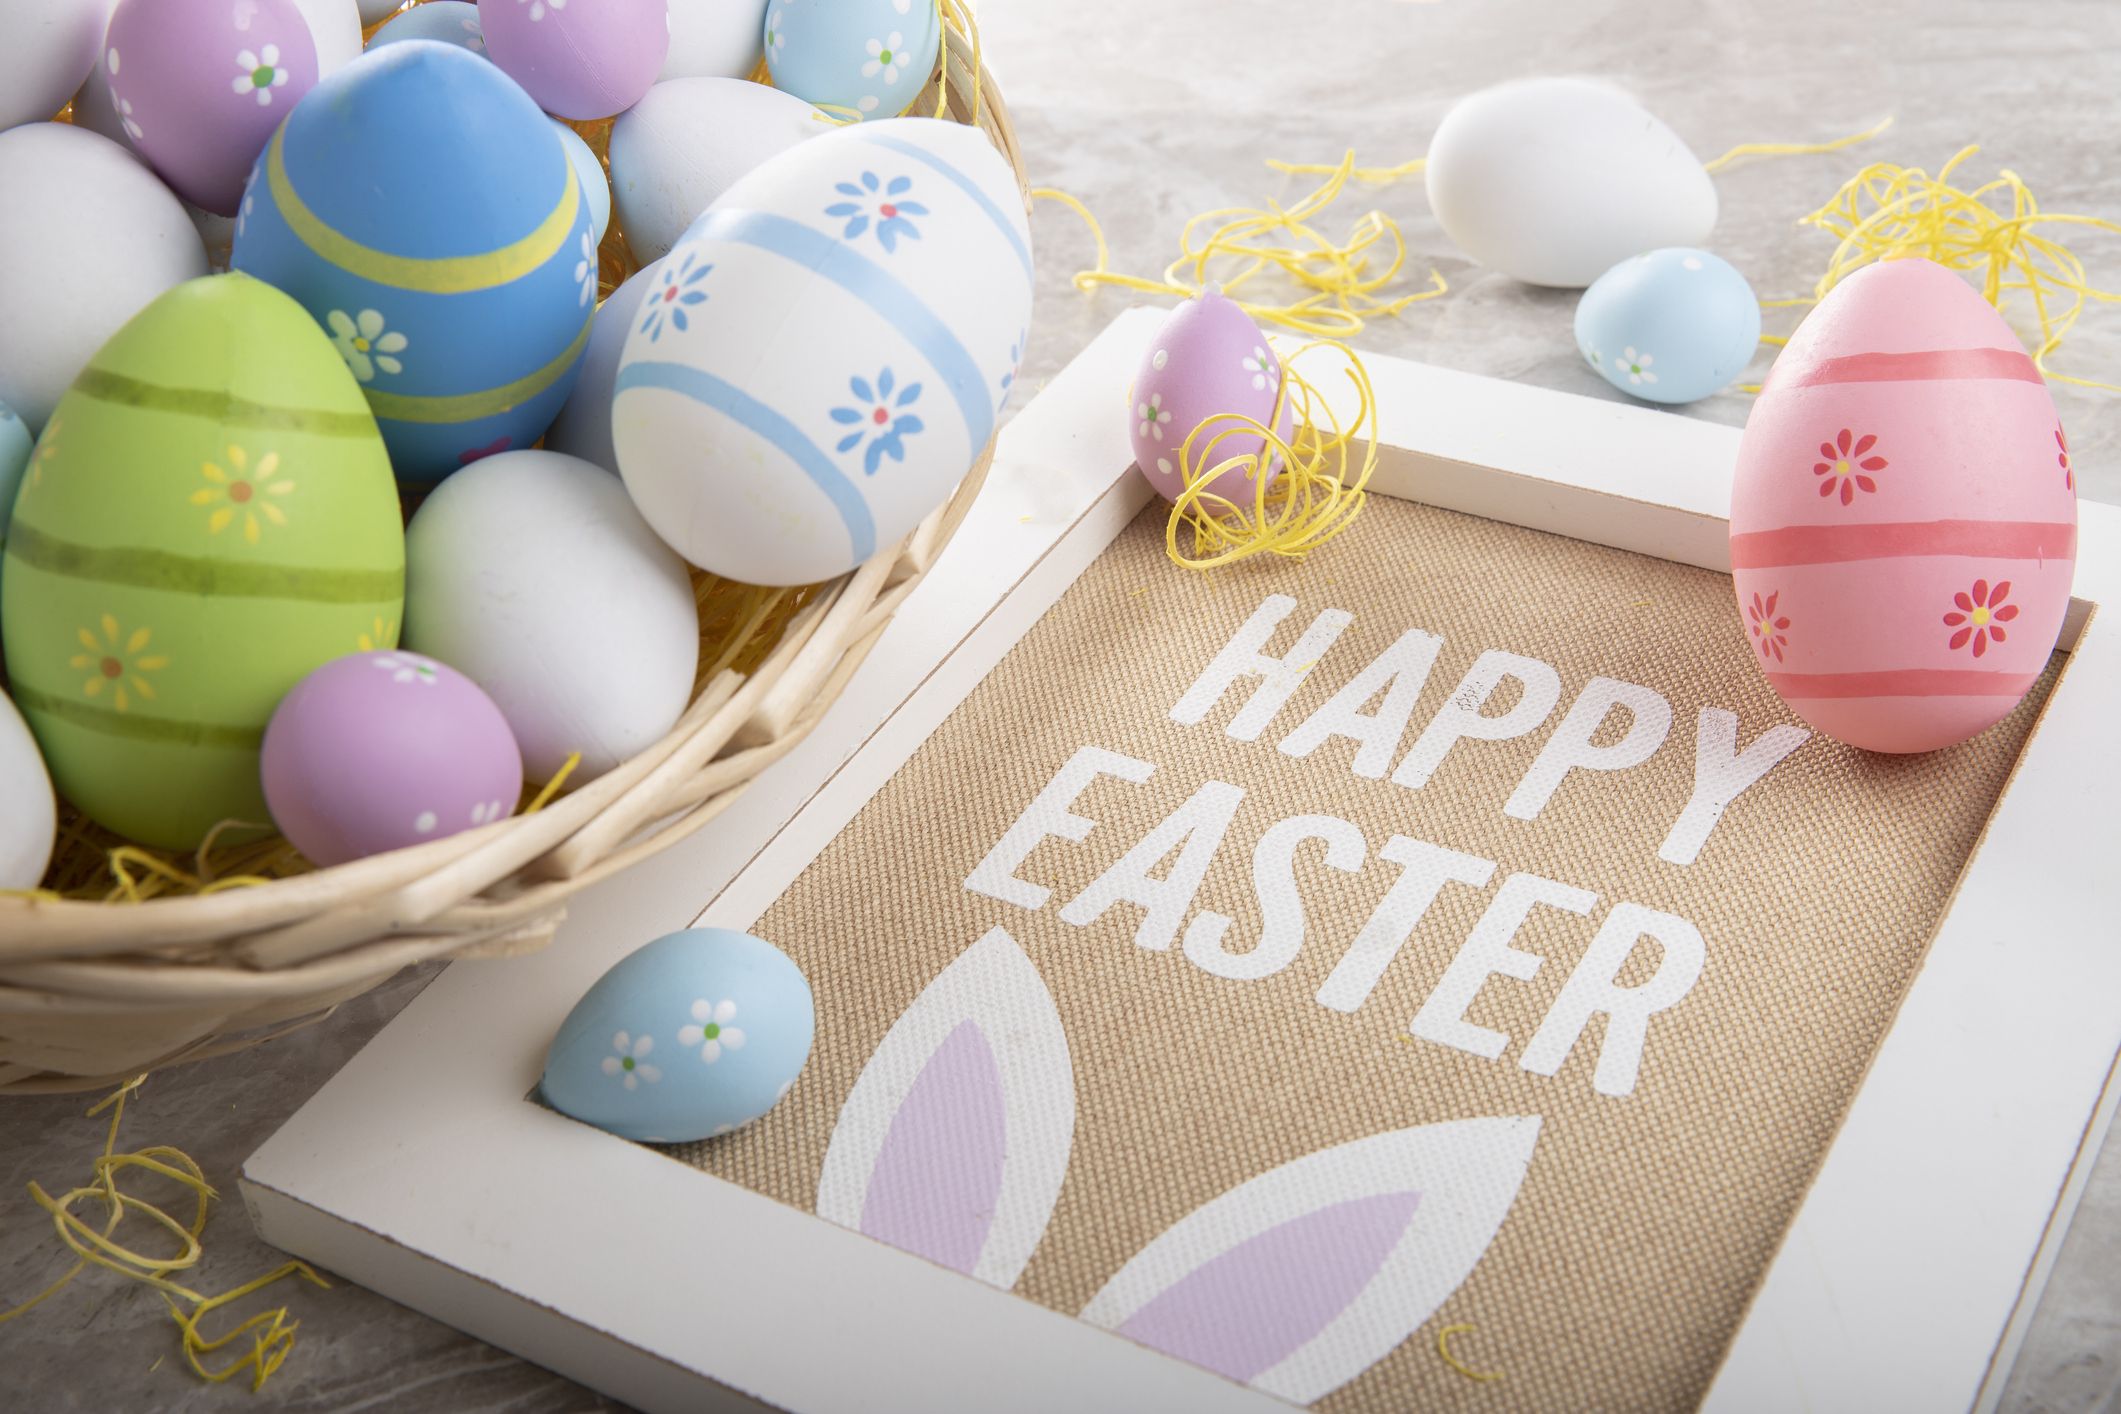 AAA would like to wish everyone a Happy Easter Holiday.